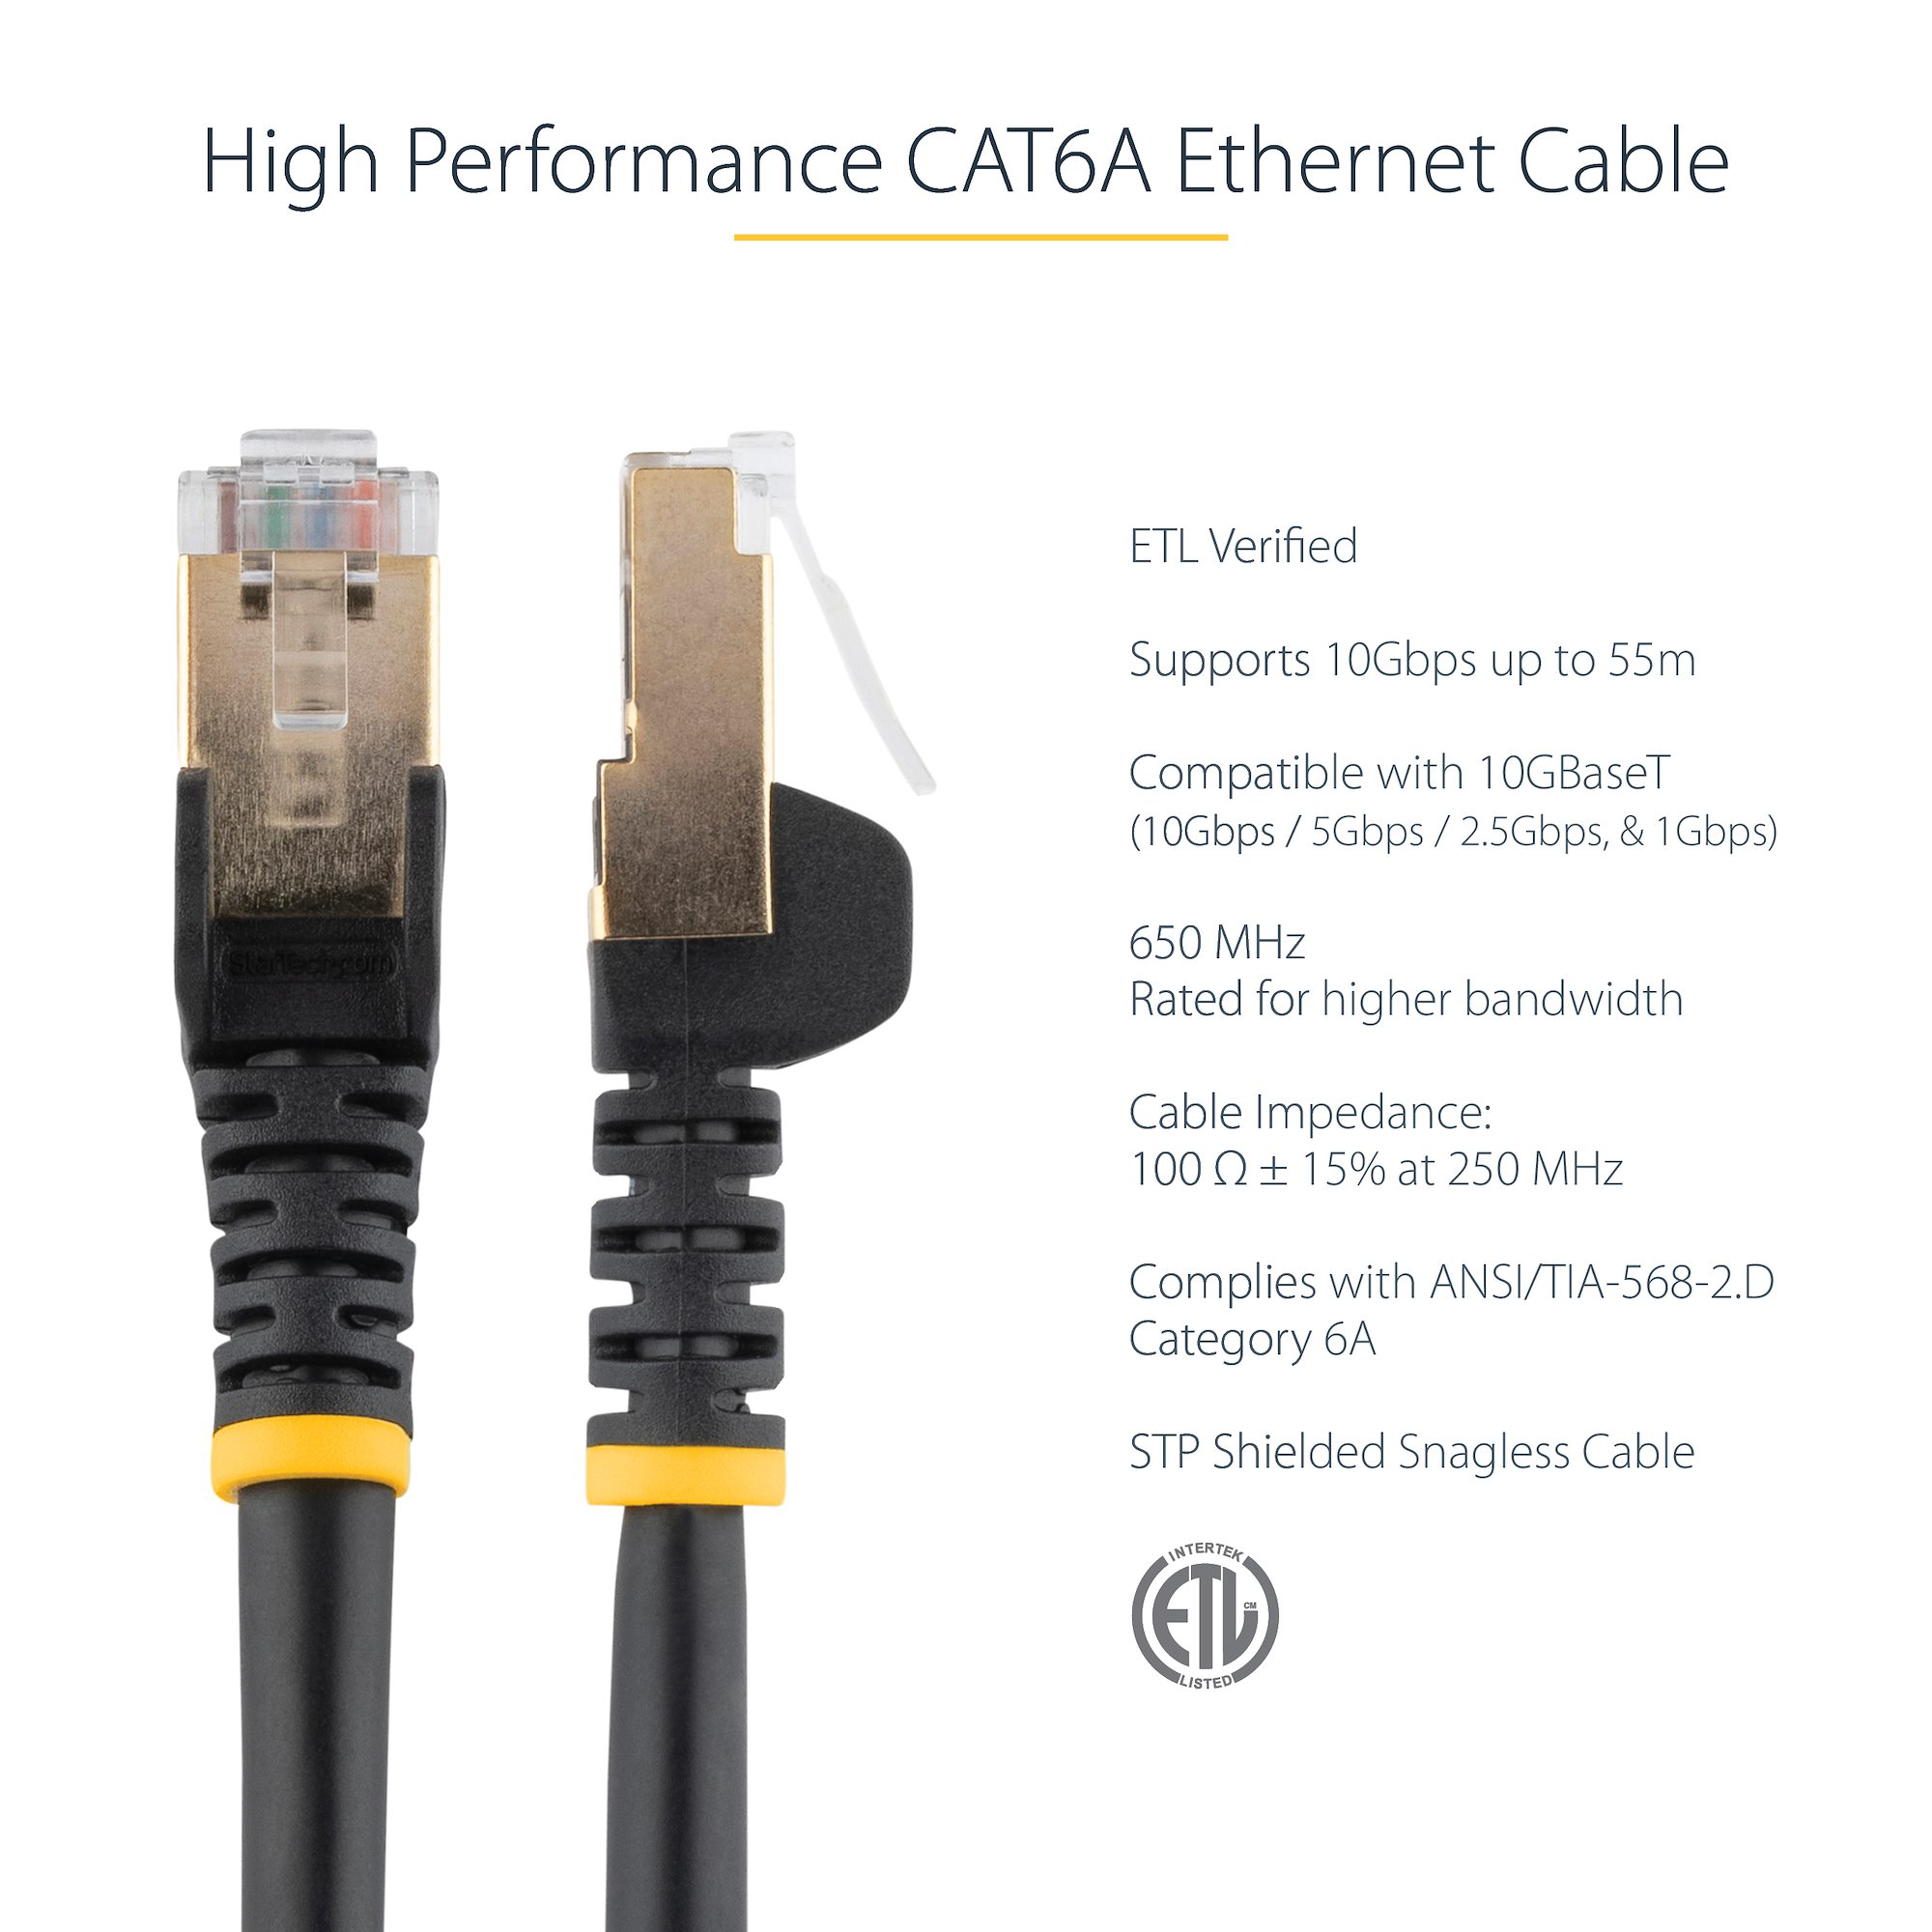 1ft CAT6 Ethernet Cable - Blue CAT 6 Gigabit Ethernet Wire -650MHz 100W PoE  RJ45 UTP Network/Patch Cord Snagless w/Strain Relief Fluke Tested/Wiring